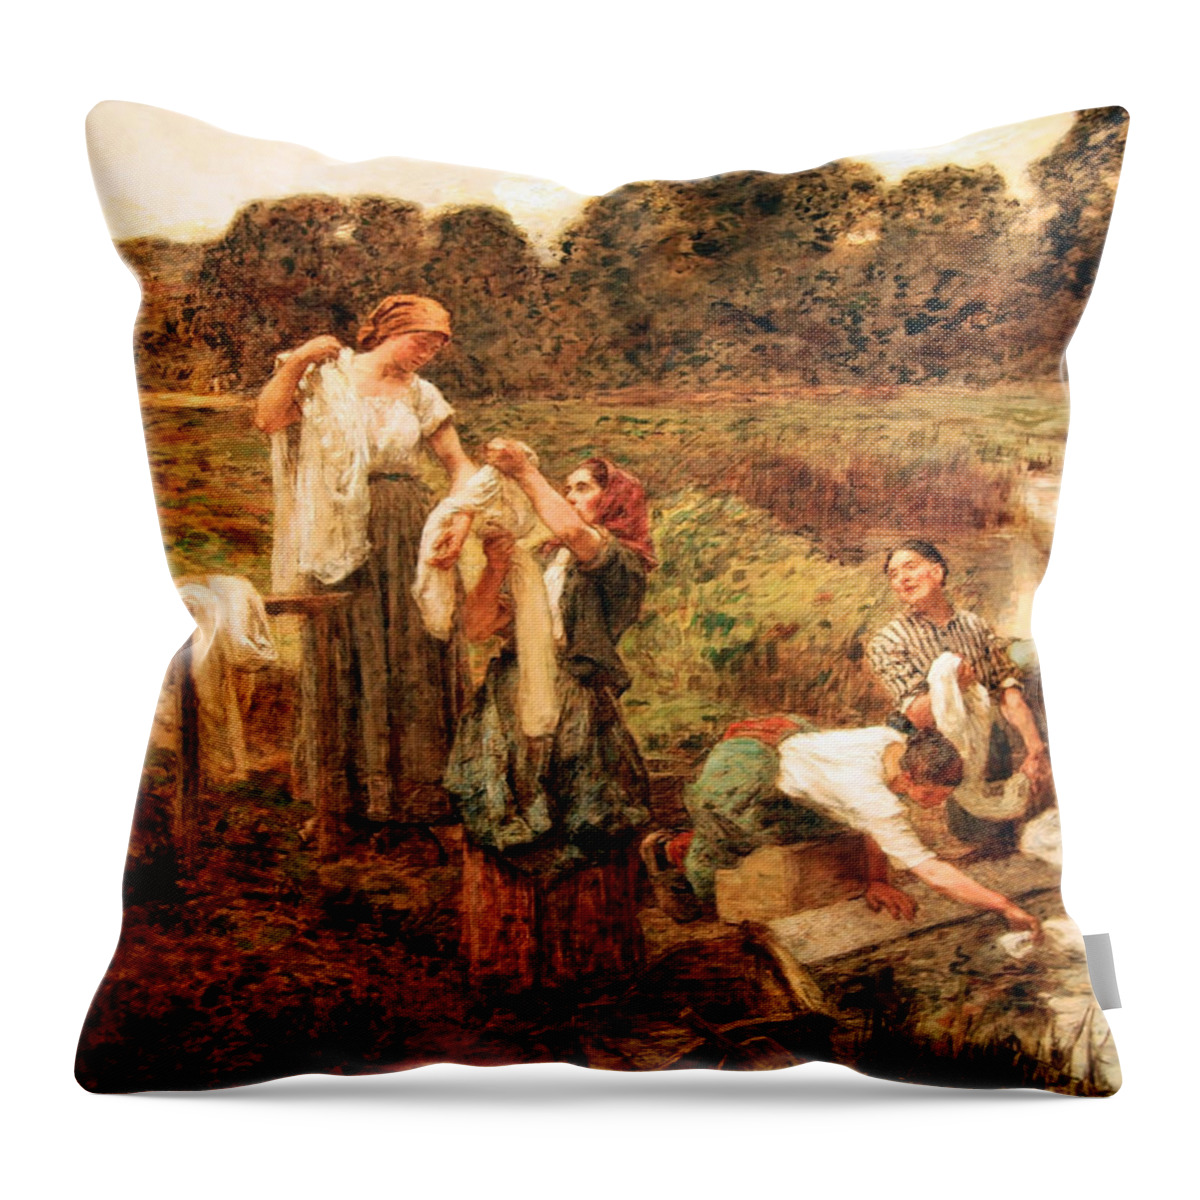 The Washerwomen On The Banks Of The Marne Throw Pillow featuring the photograph Lhermitte's The Washerwomen On The Banks Of The Marne by Cora Wandel